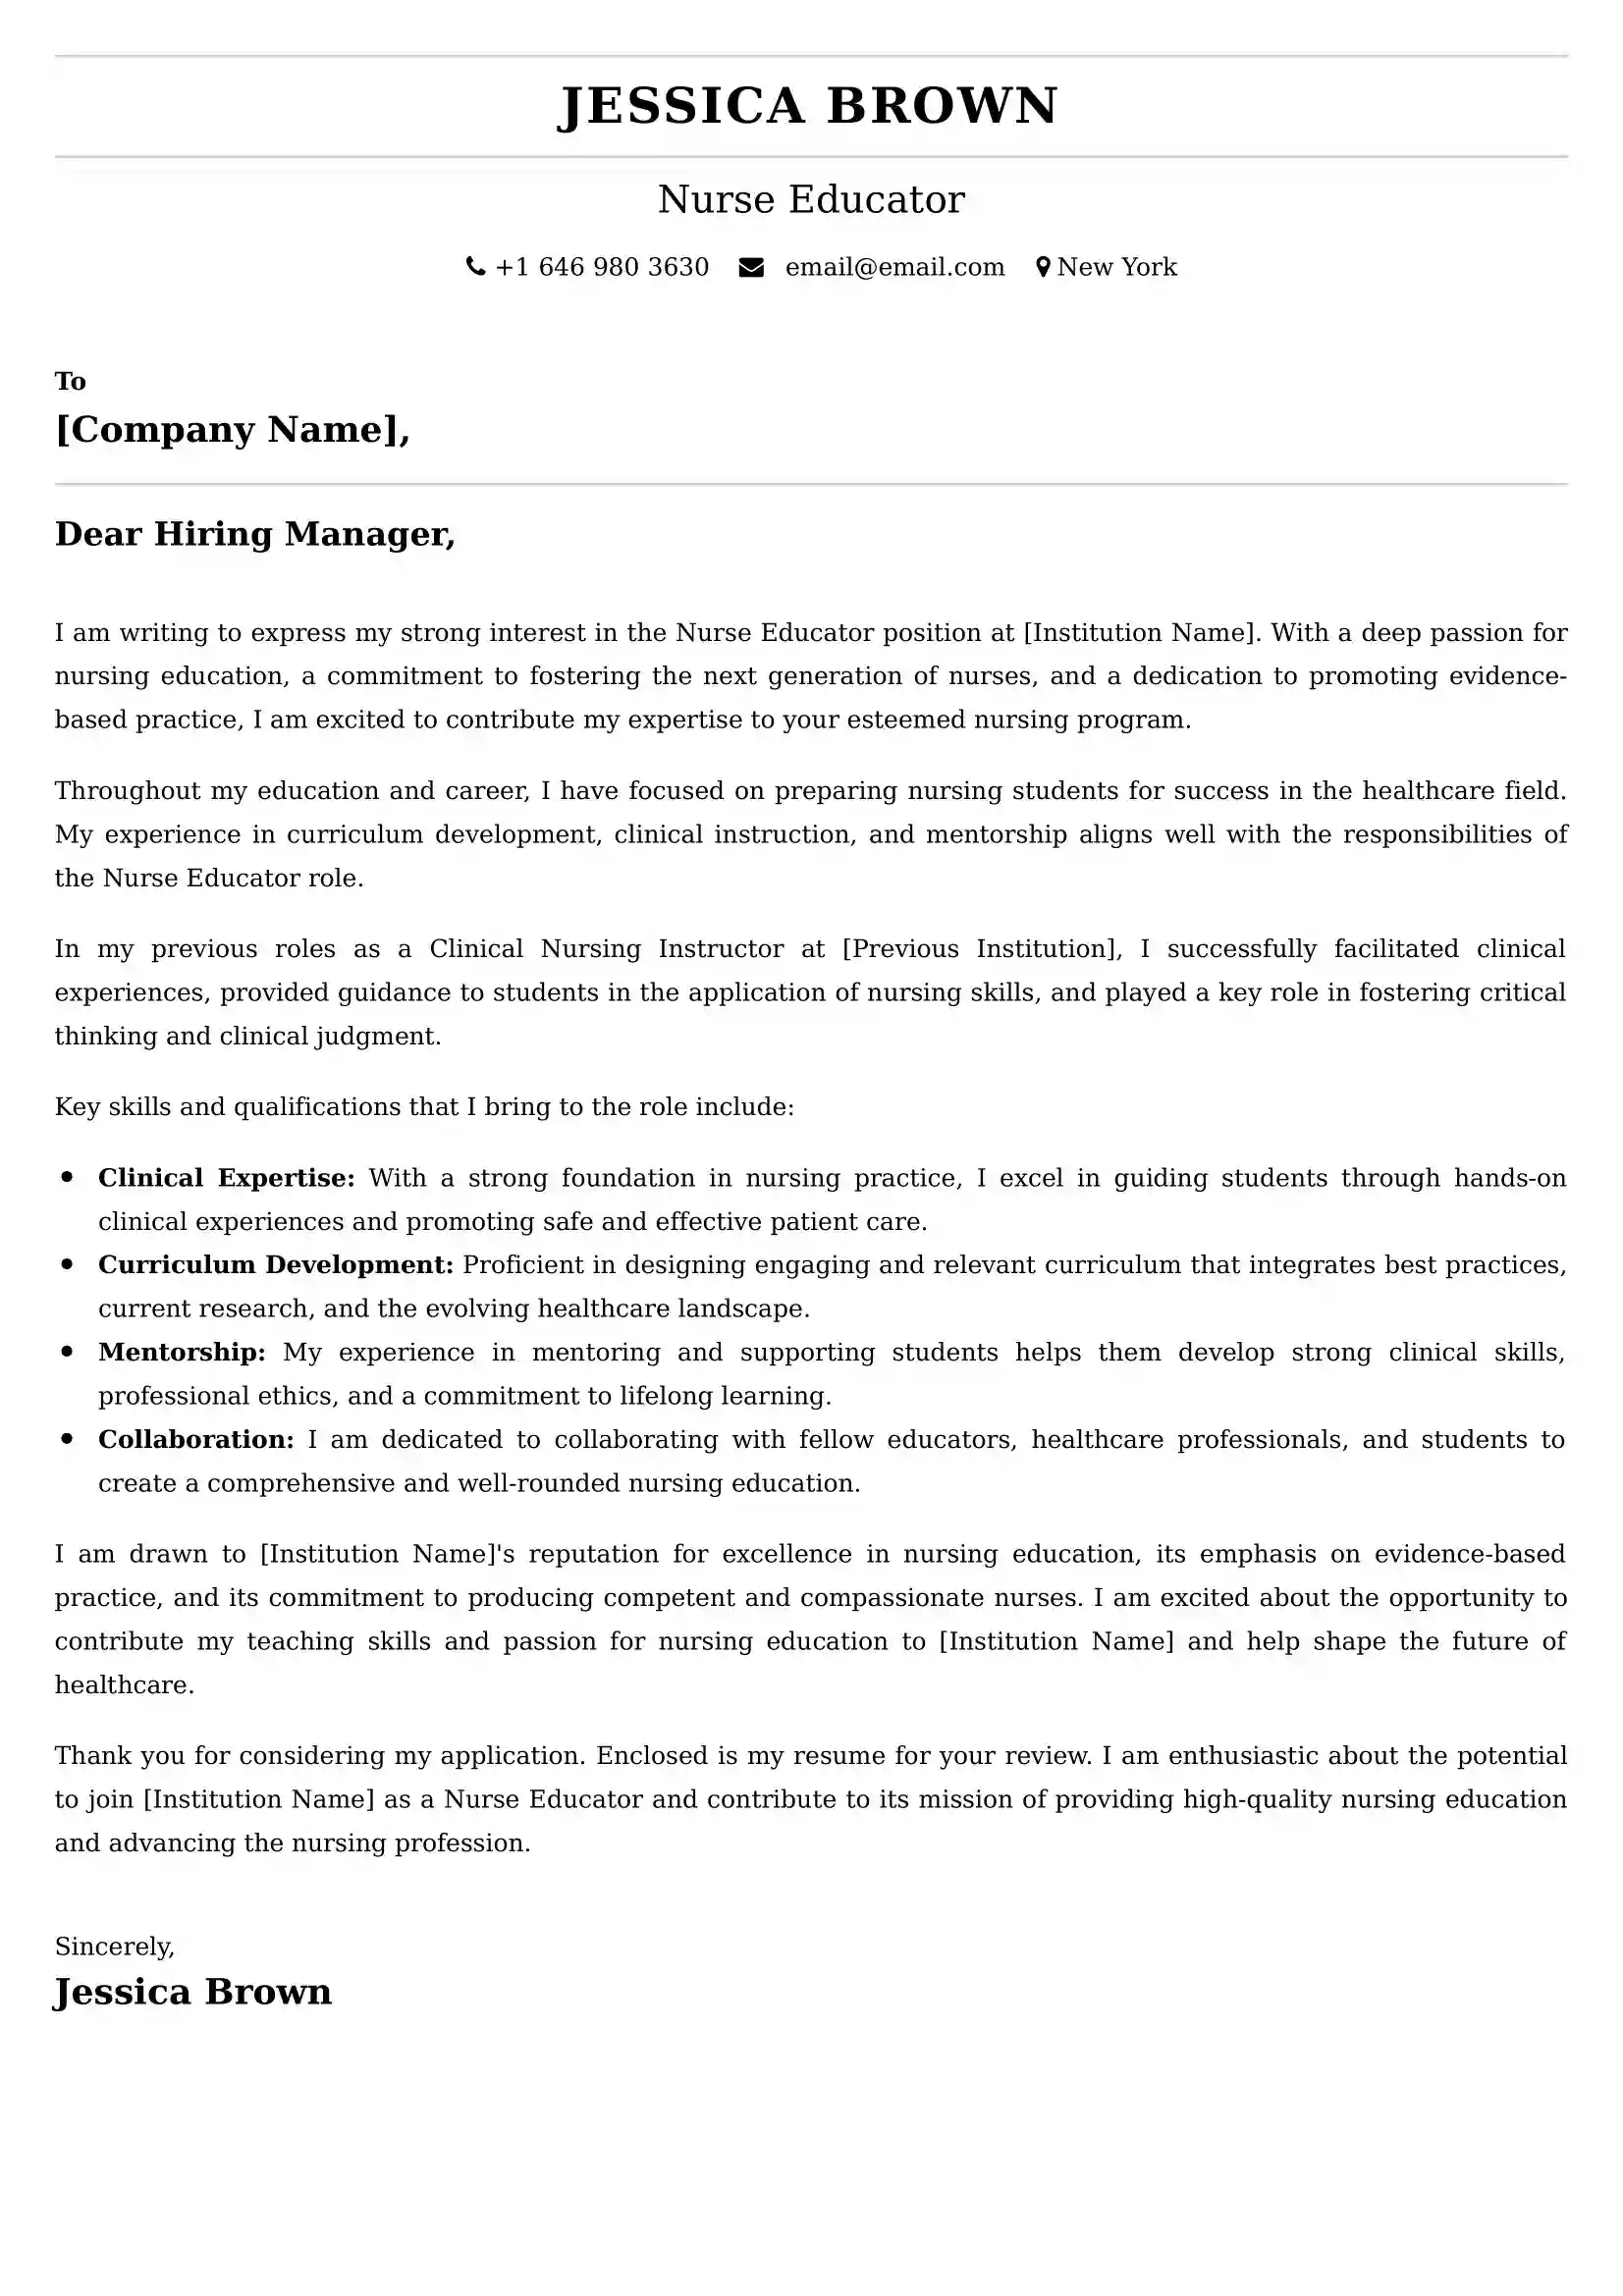 55+ Professional Teaching Cover Letter Samples, Latest Format